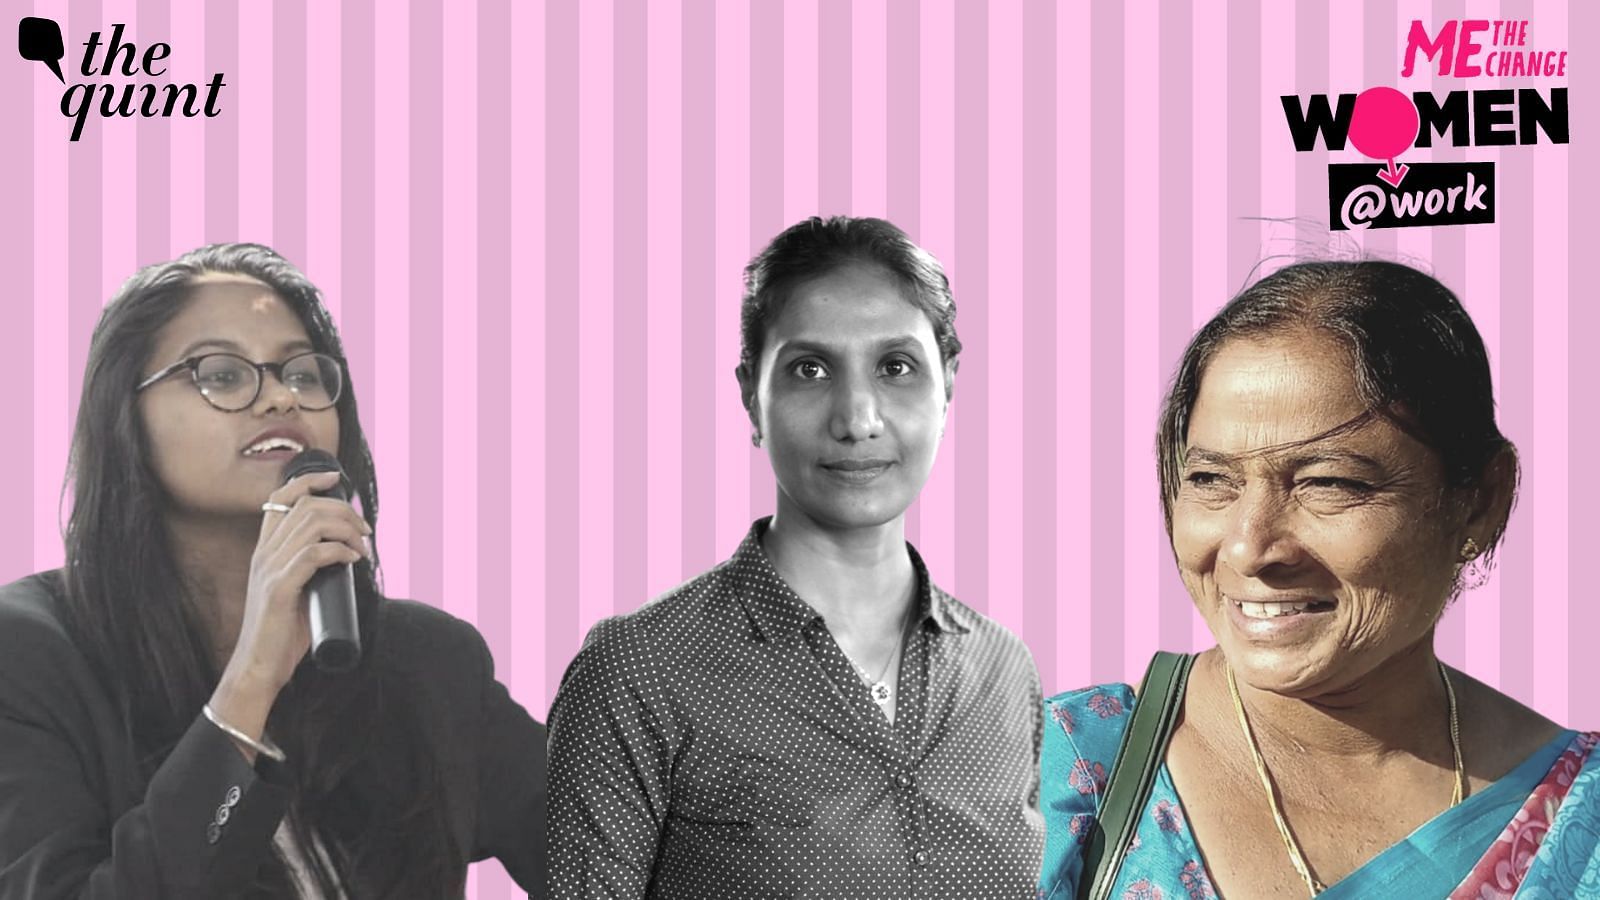 <div class="paragraphs"><p>This Women's Day, <strong>The Quint</strong>, through our <a href="https://www.thequint.com/topic/womens-day">Women@Work</a> campaign, introduces you to three women who have made a mark in their respective fields of work – 'General' Narsamma, a community radio manager in Telangana (right); Anubha Maneshwar, a coder from Mumbai who helps underprivileged girls access tech education (left); and Simi Basheer, a retired major in the Indian Army who has worked in conflict zones.</p></div>